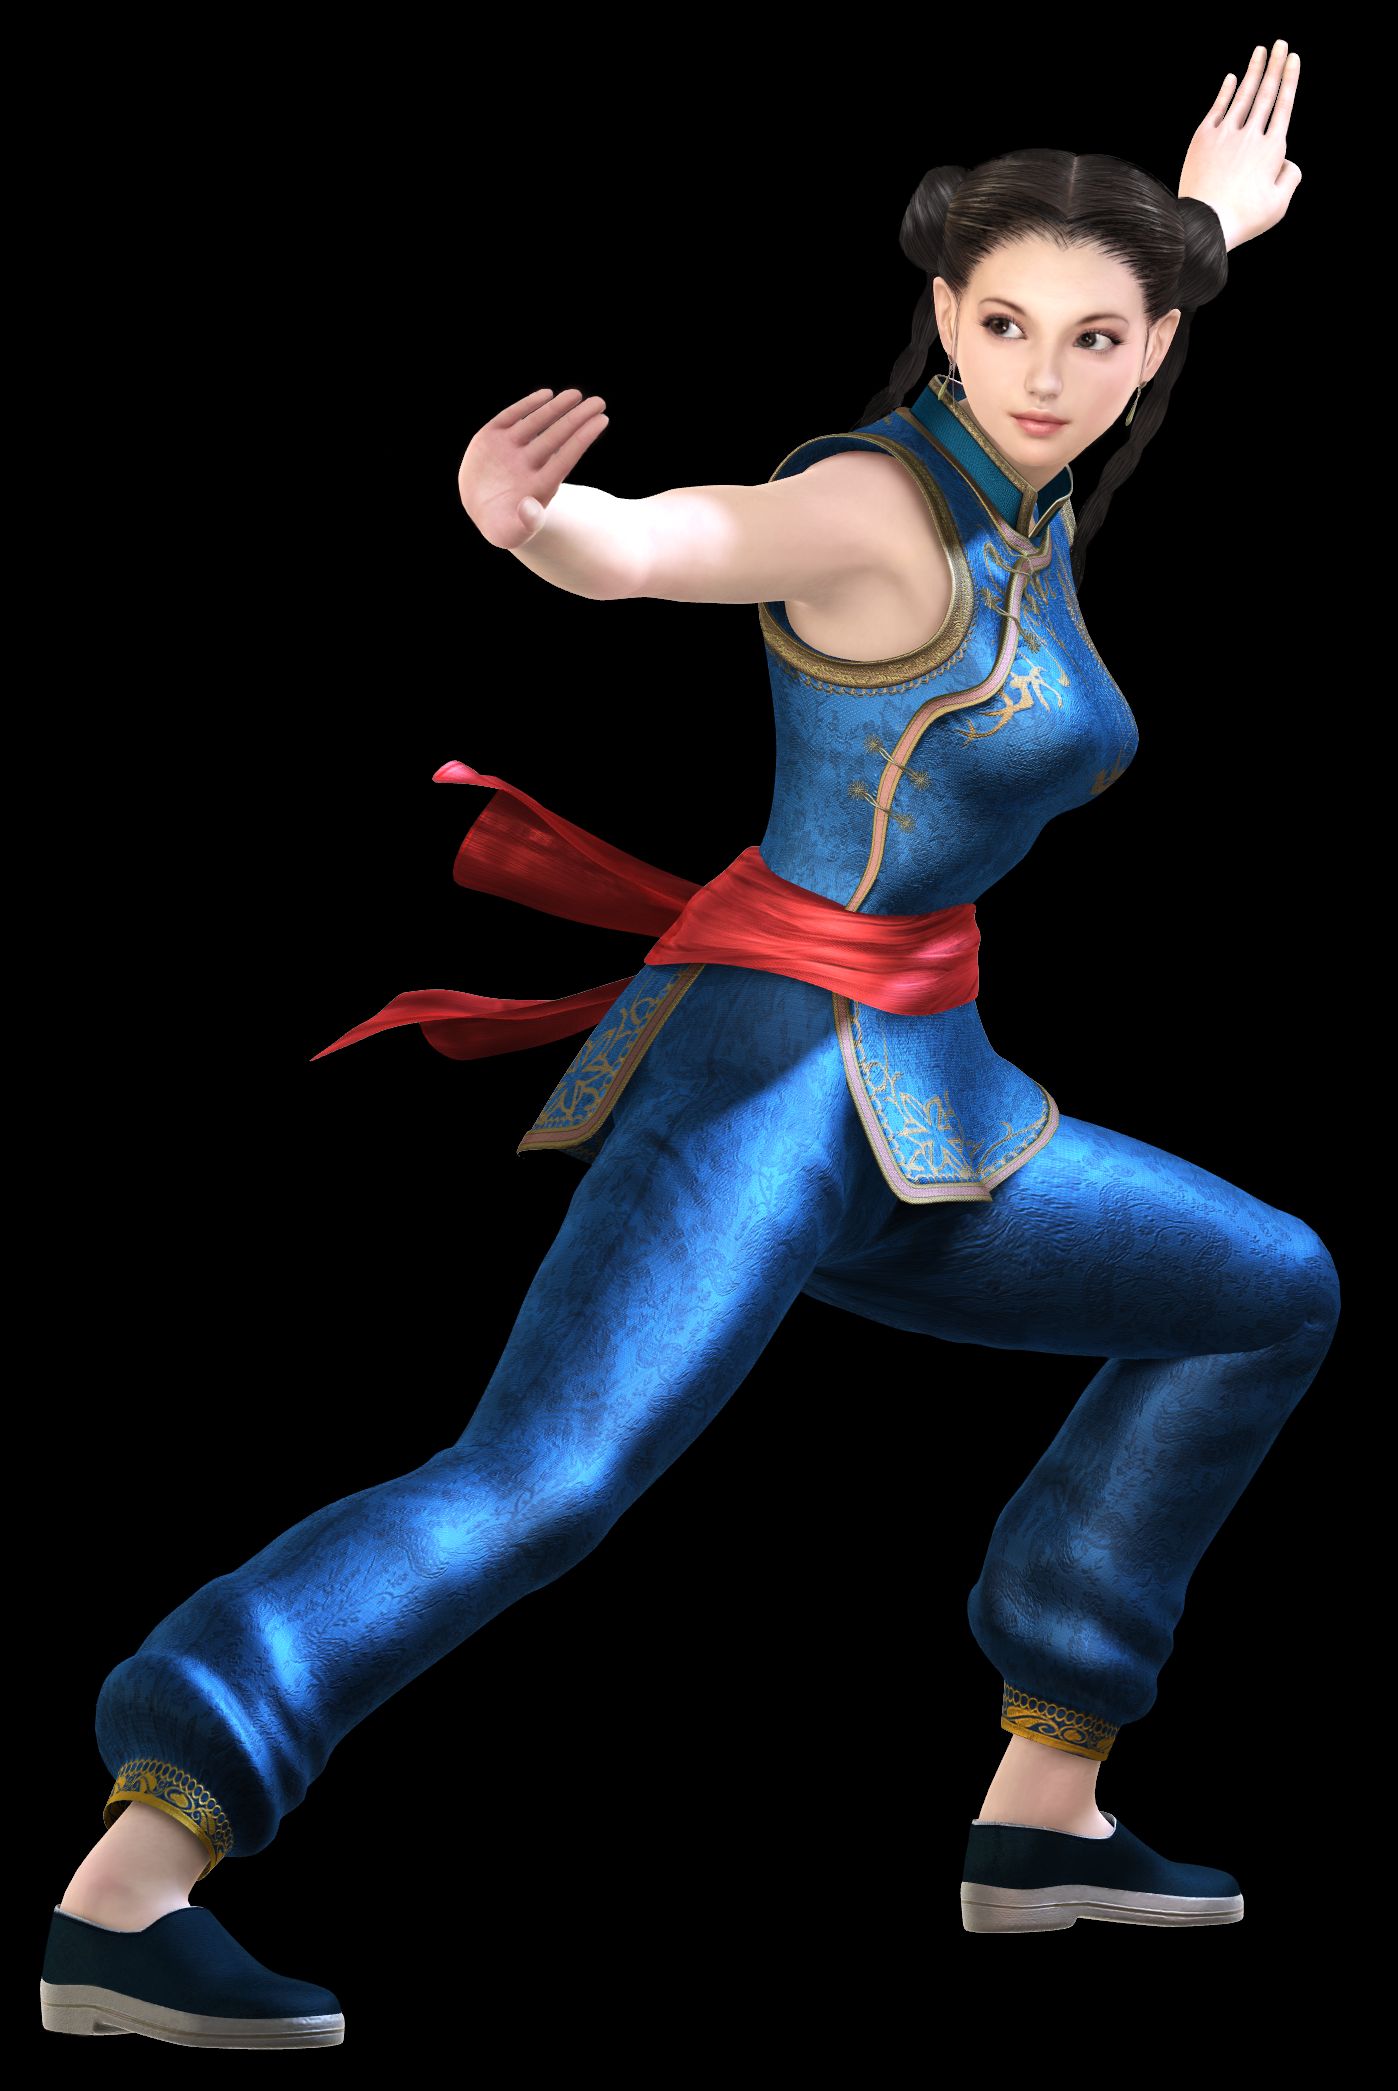 virtua fighter 5 Picture - Image Abyss